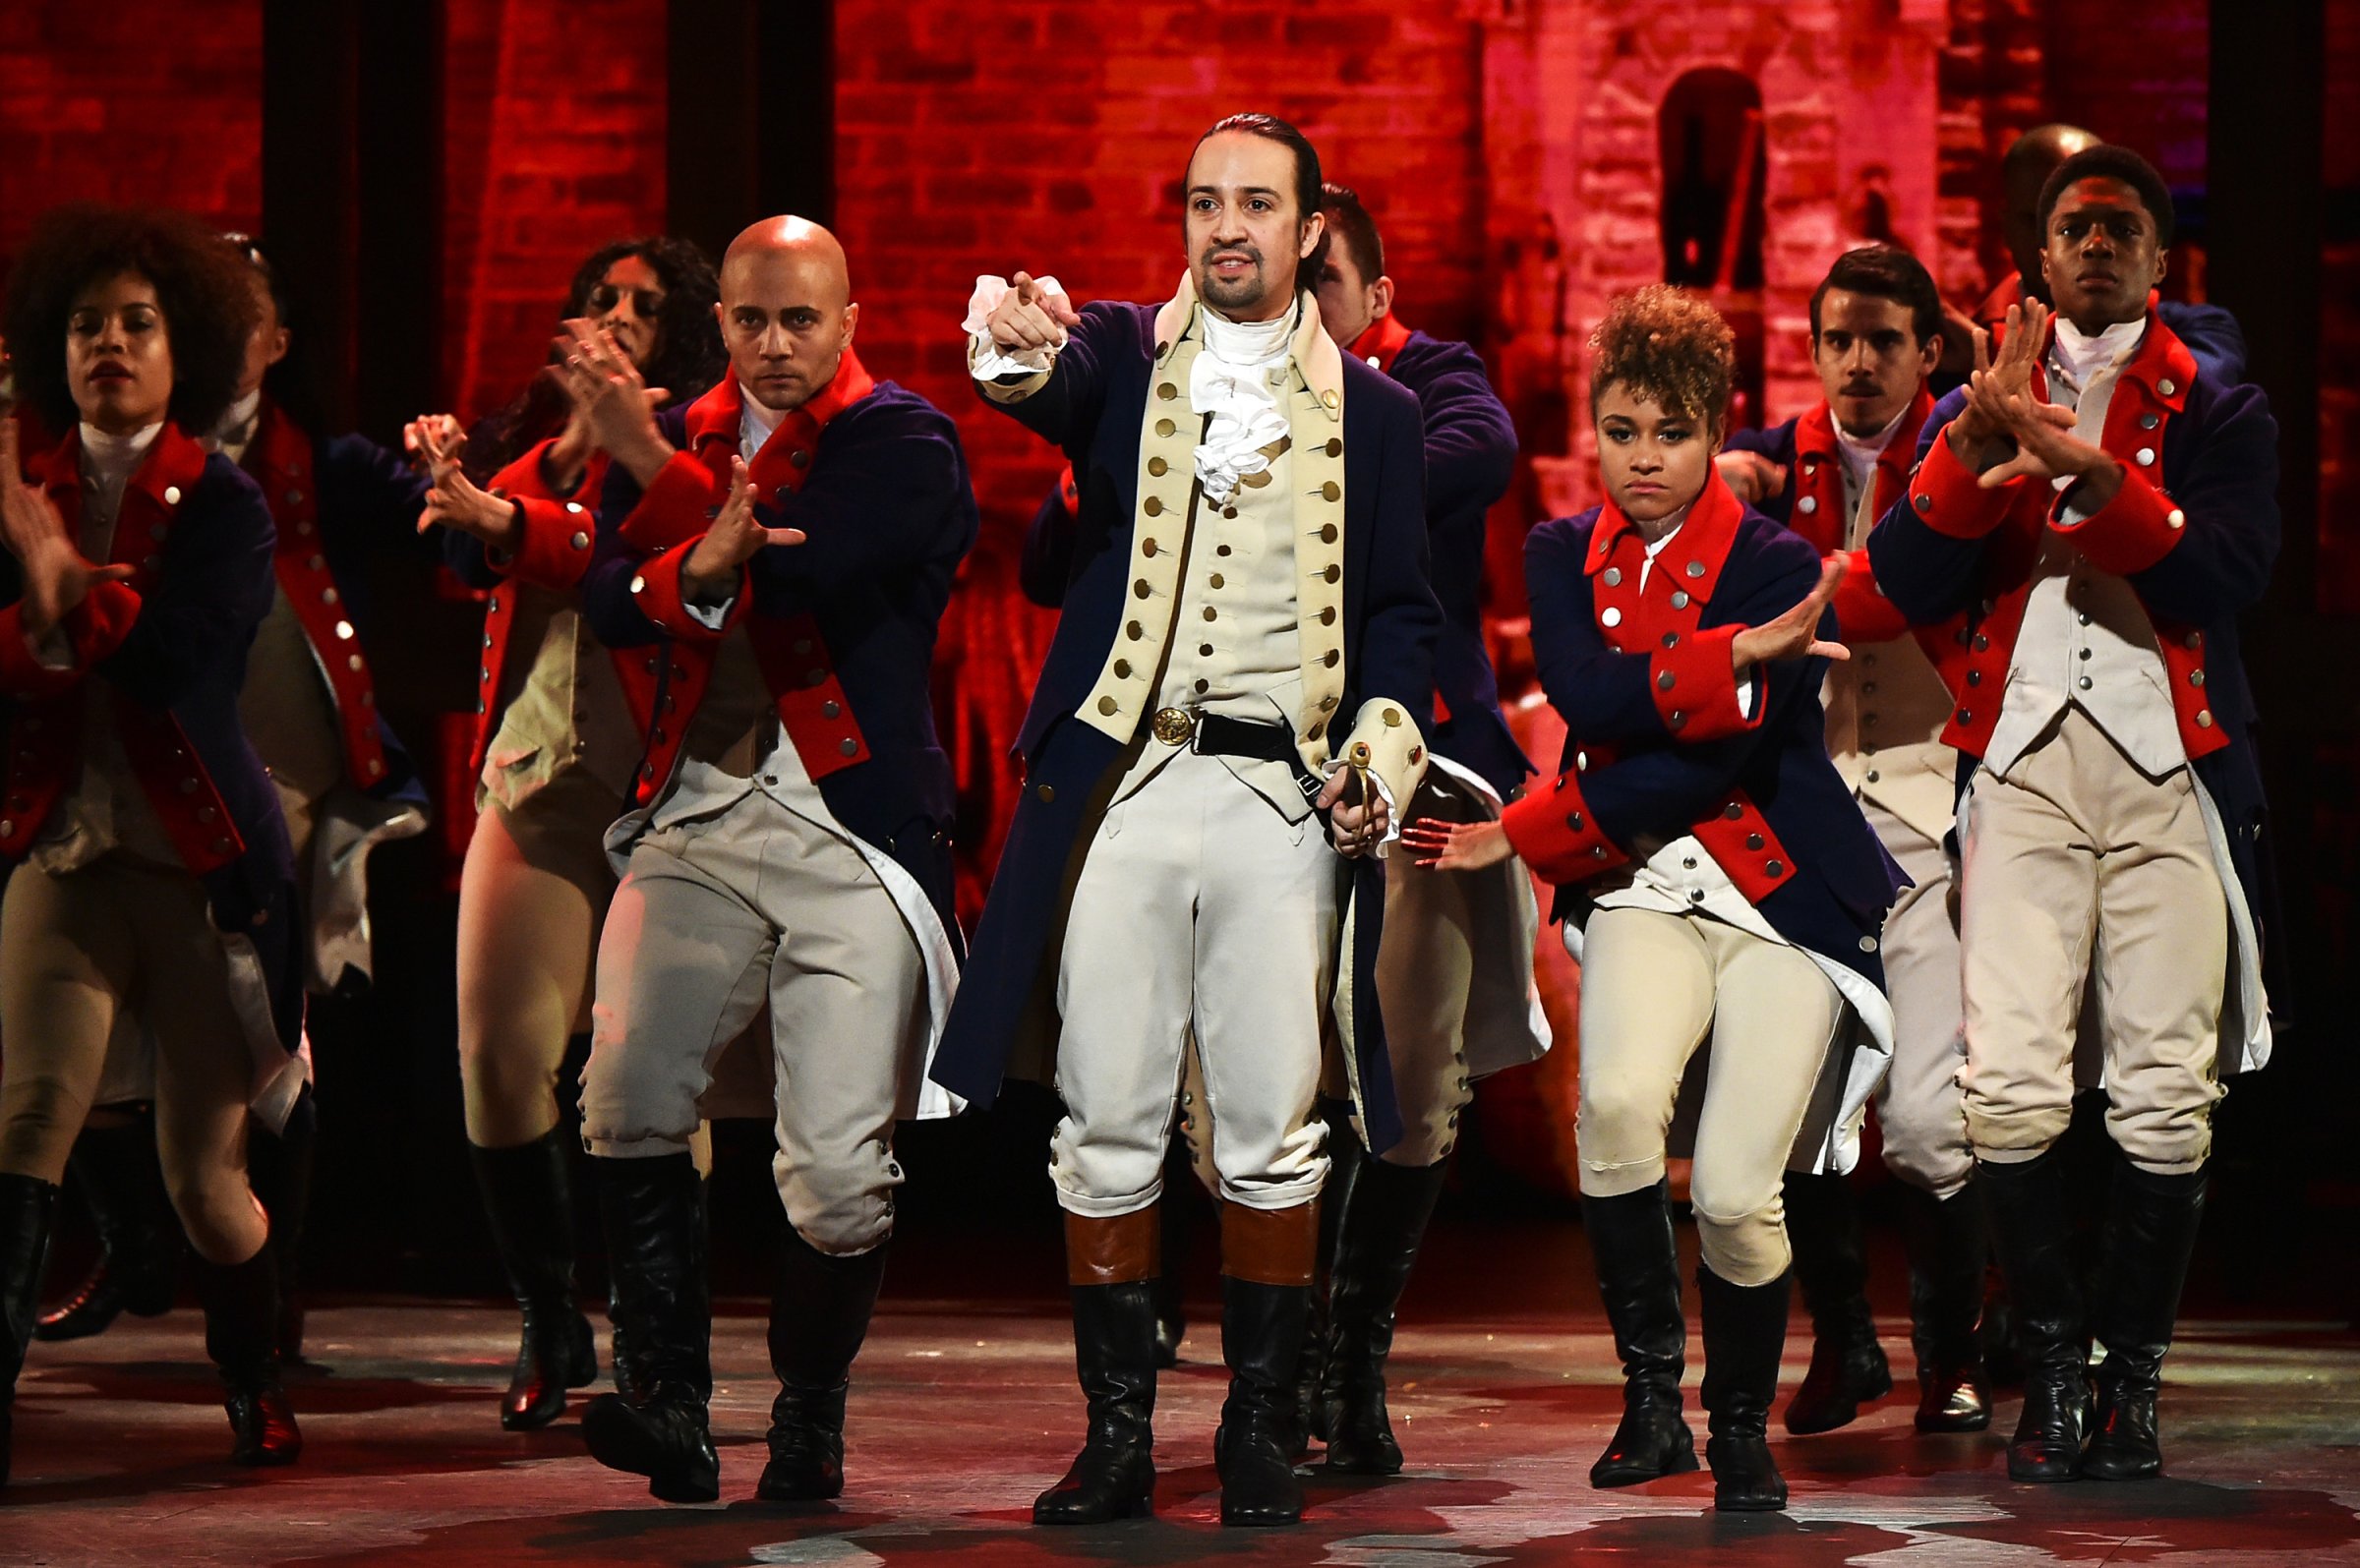 Lin-Manuel Miranda and the cast of 'Hamilton' perform onstage during the 70th Annual Tony Awards at The Beacon Theatre in New York City, June 12, 2016.